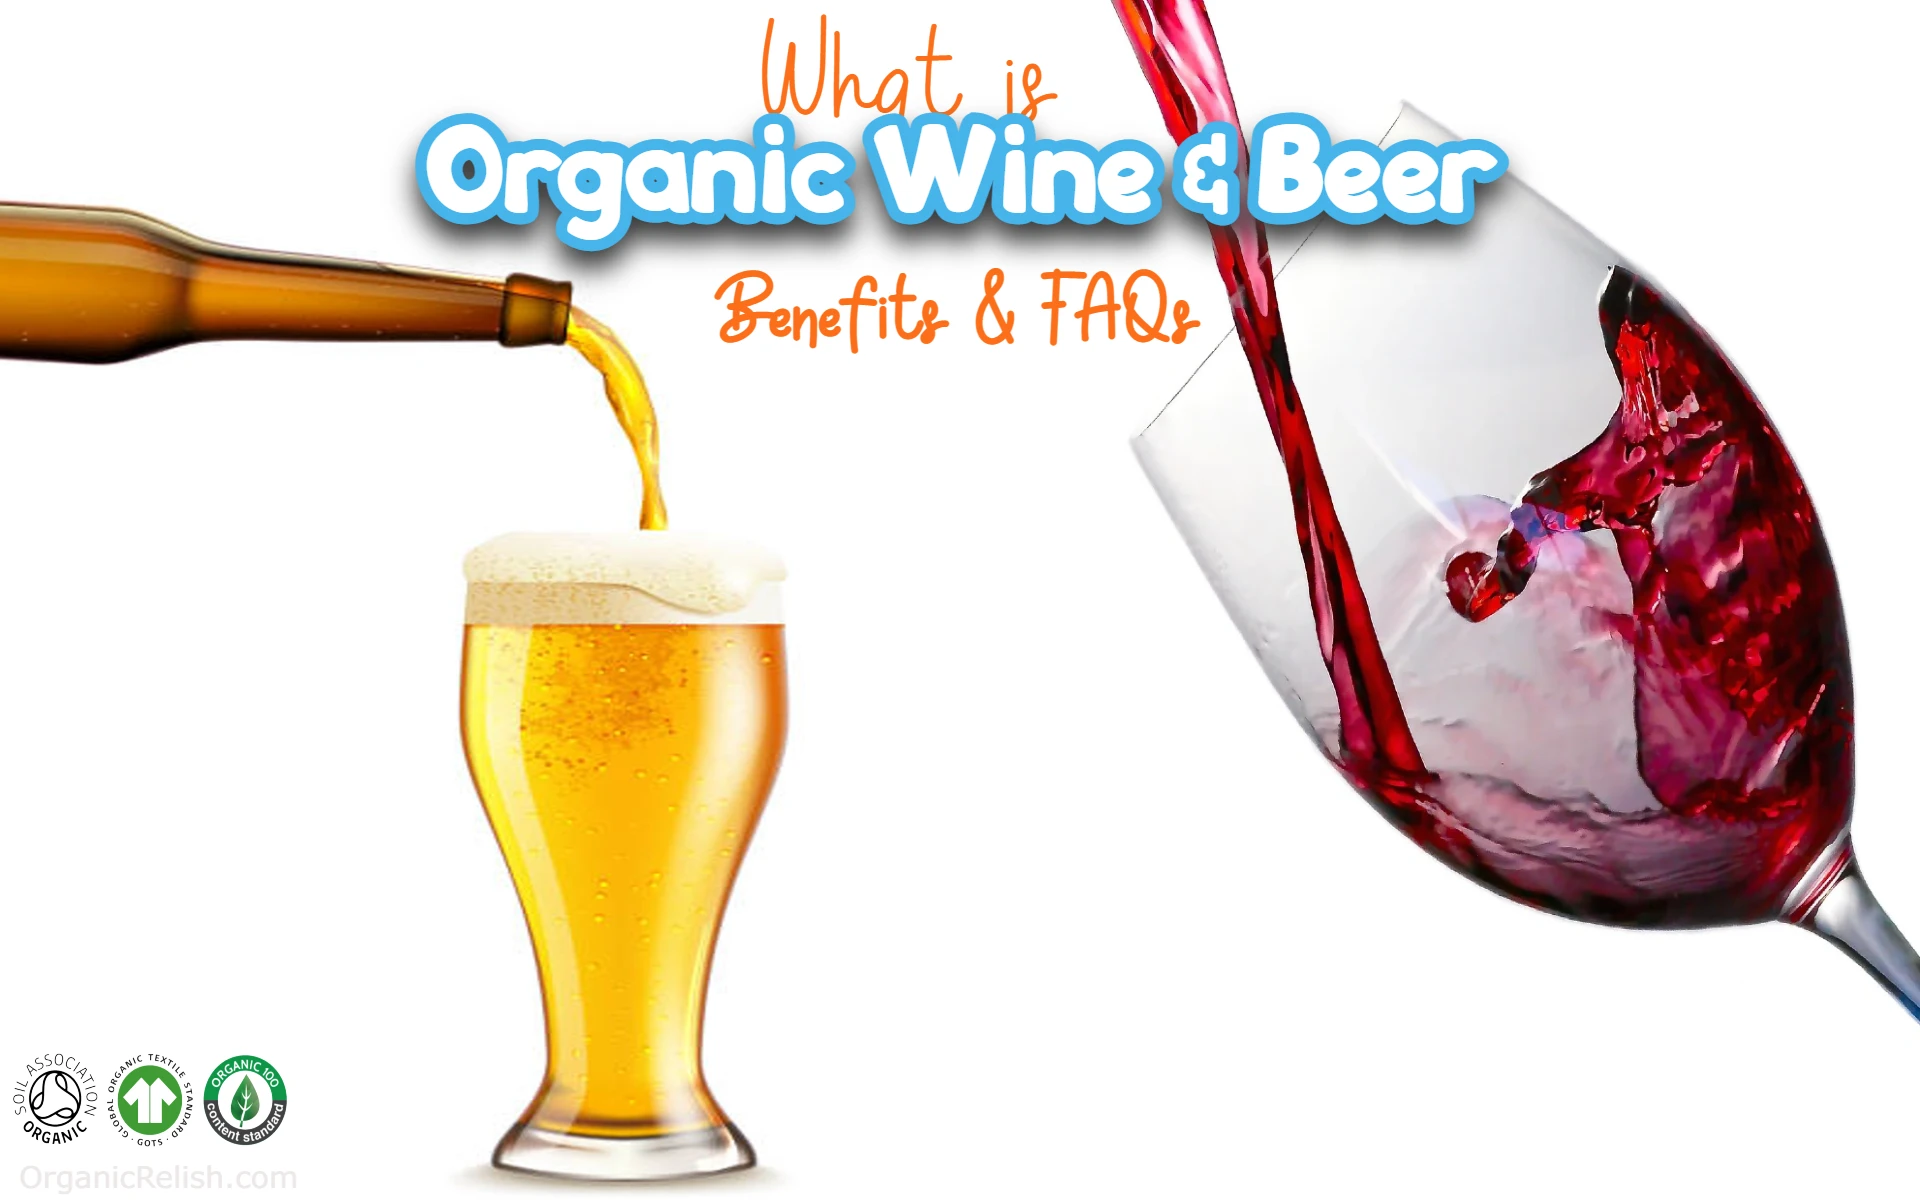 What is organic wine and beer